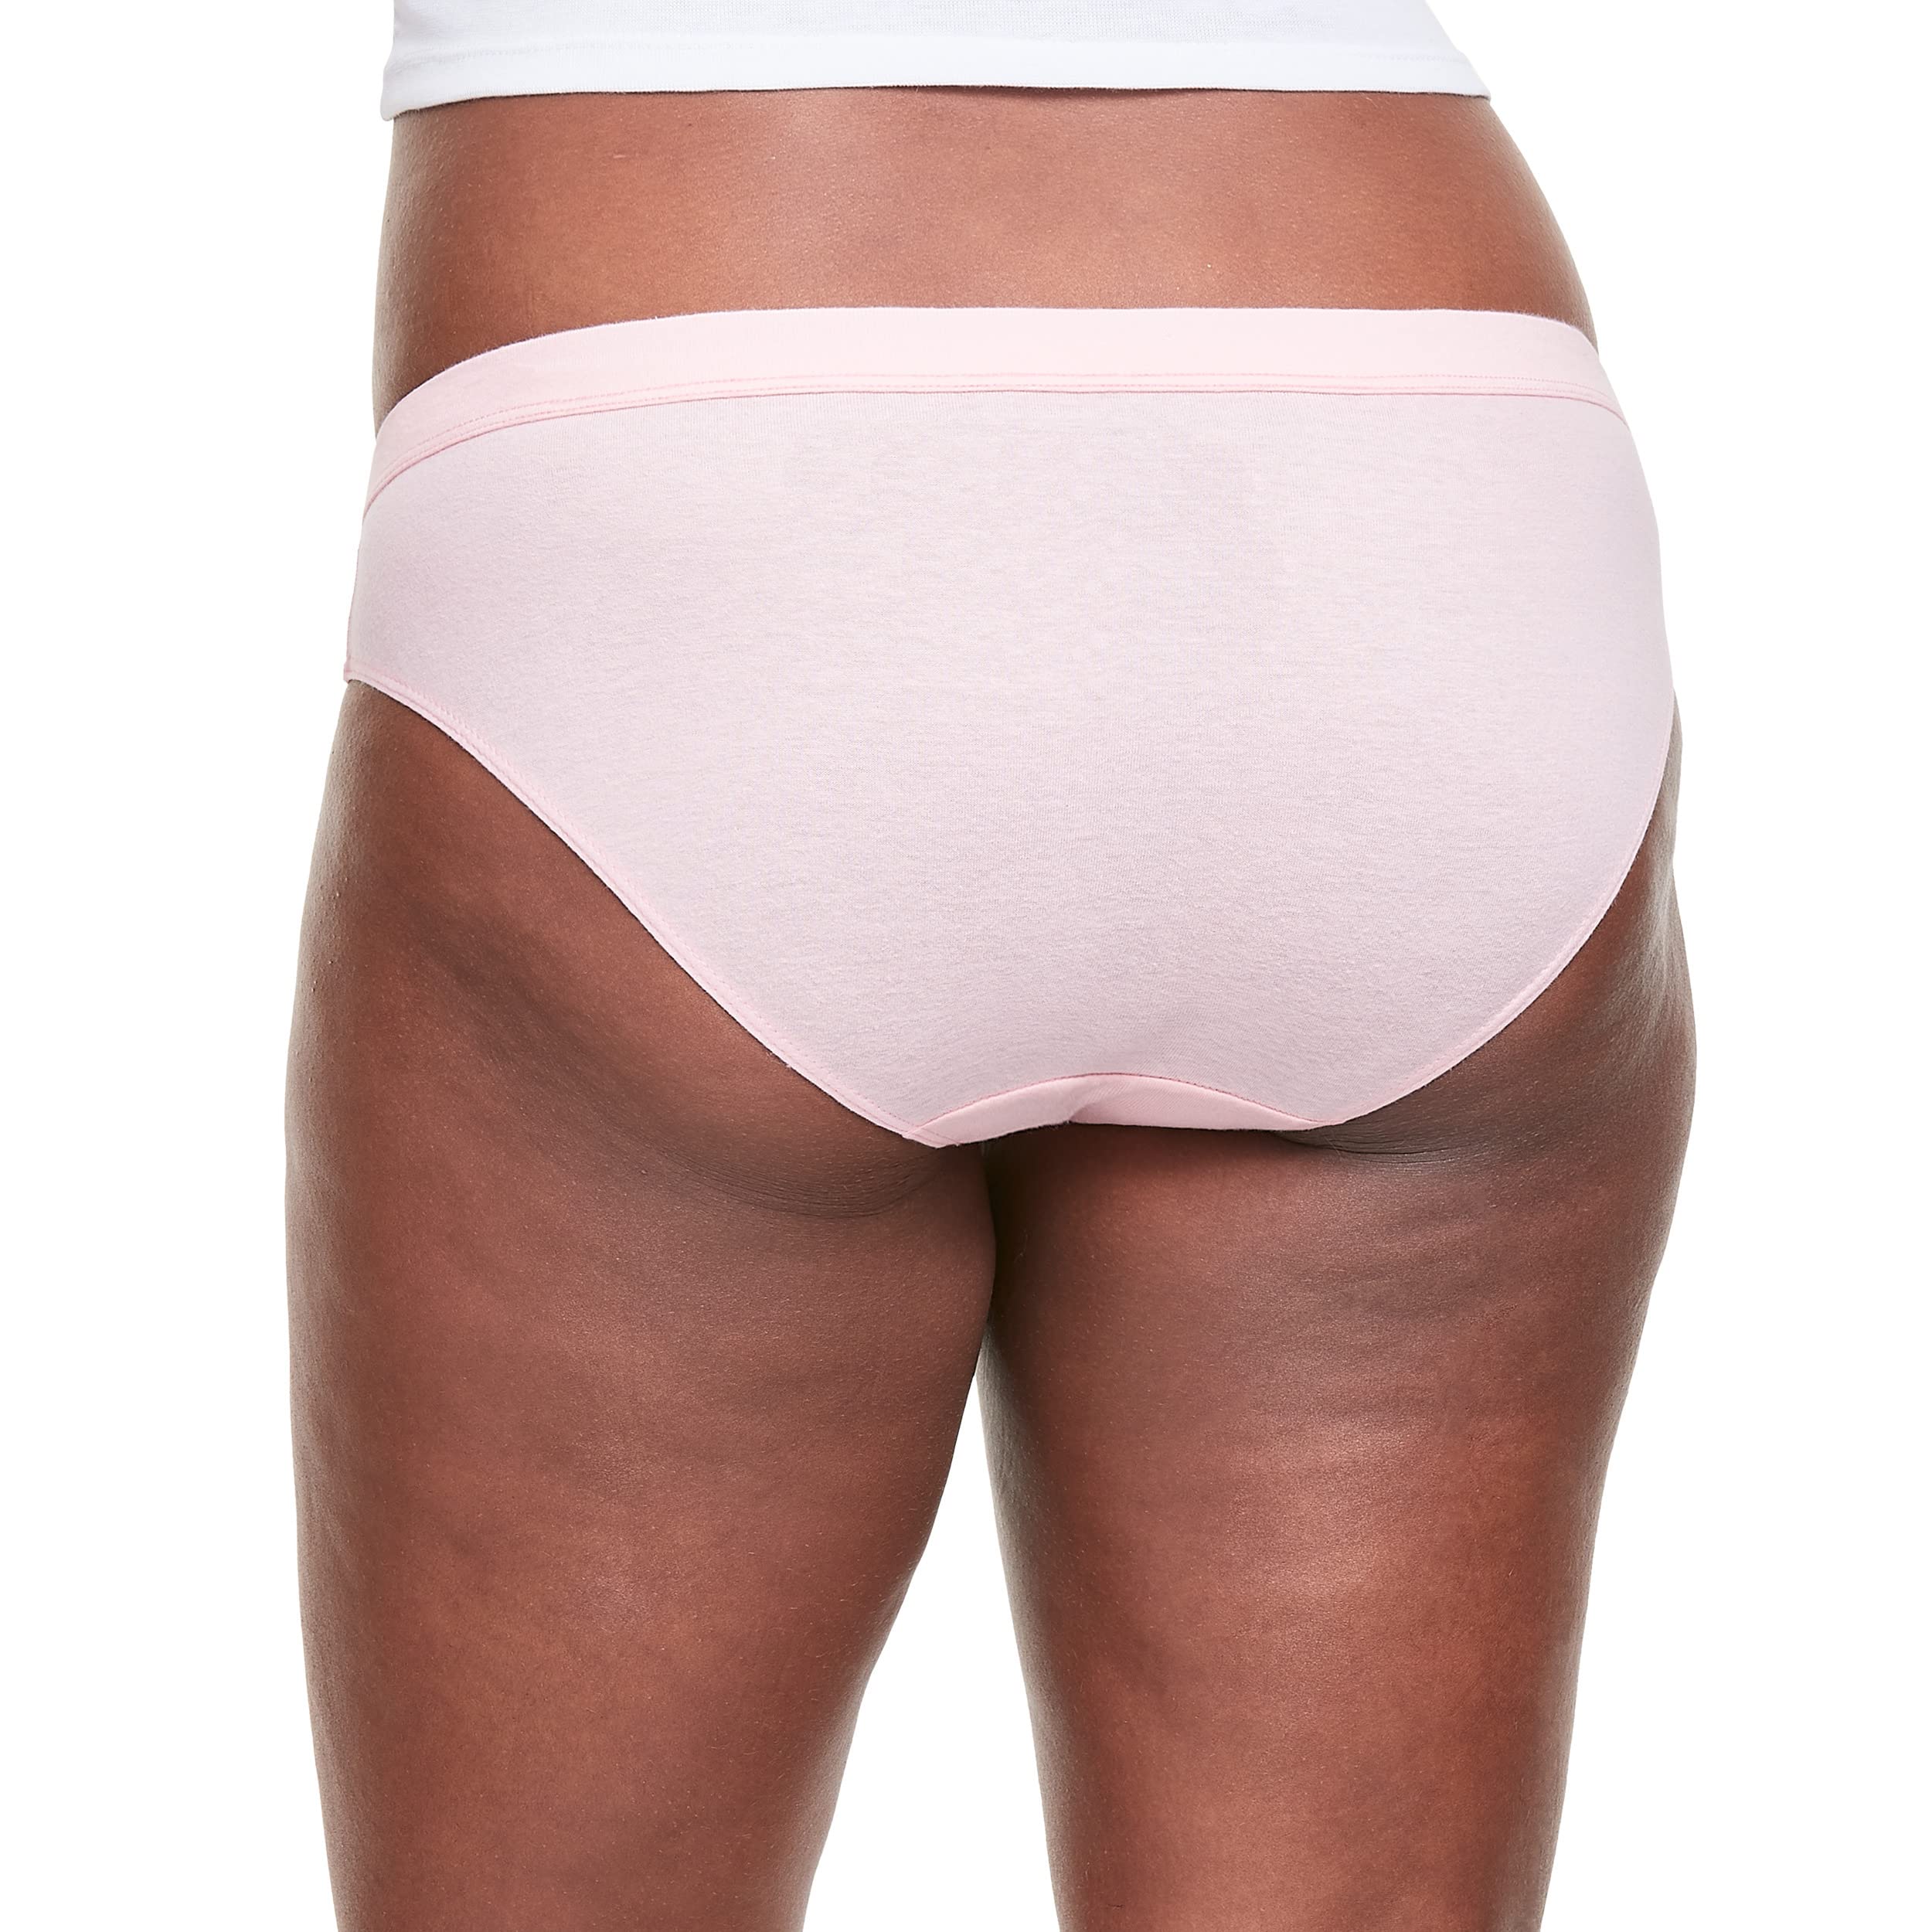 Hanes Women's Organic Cotton Panties Pack, ComfortSoft Underwear, 6-Pack (Colors May Vary)